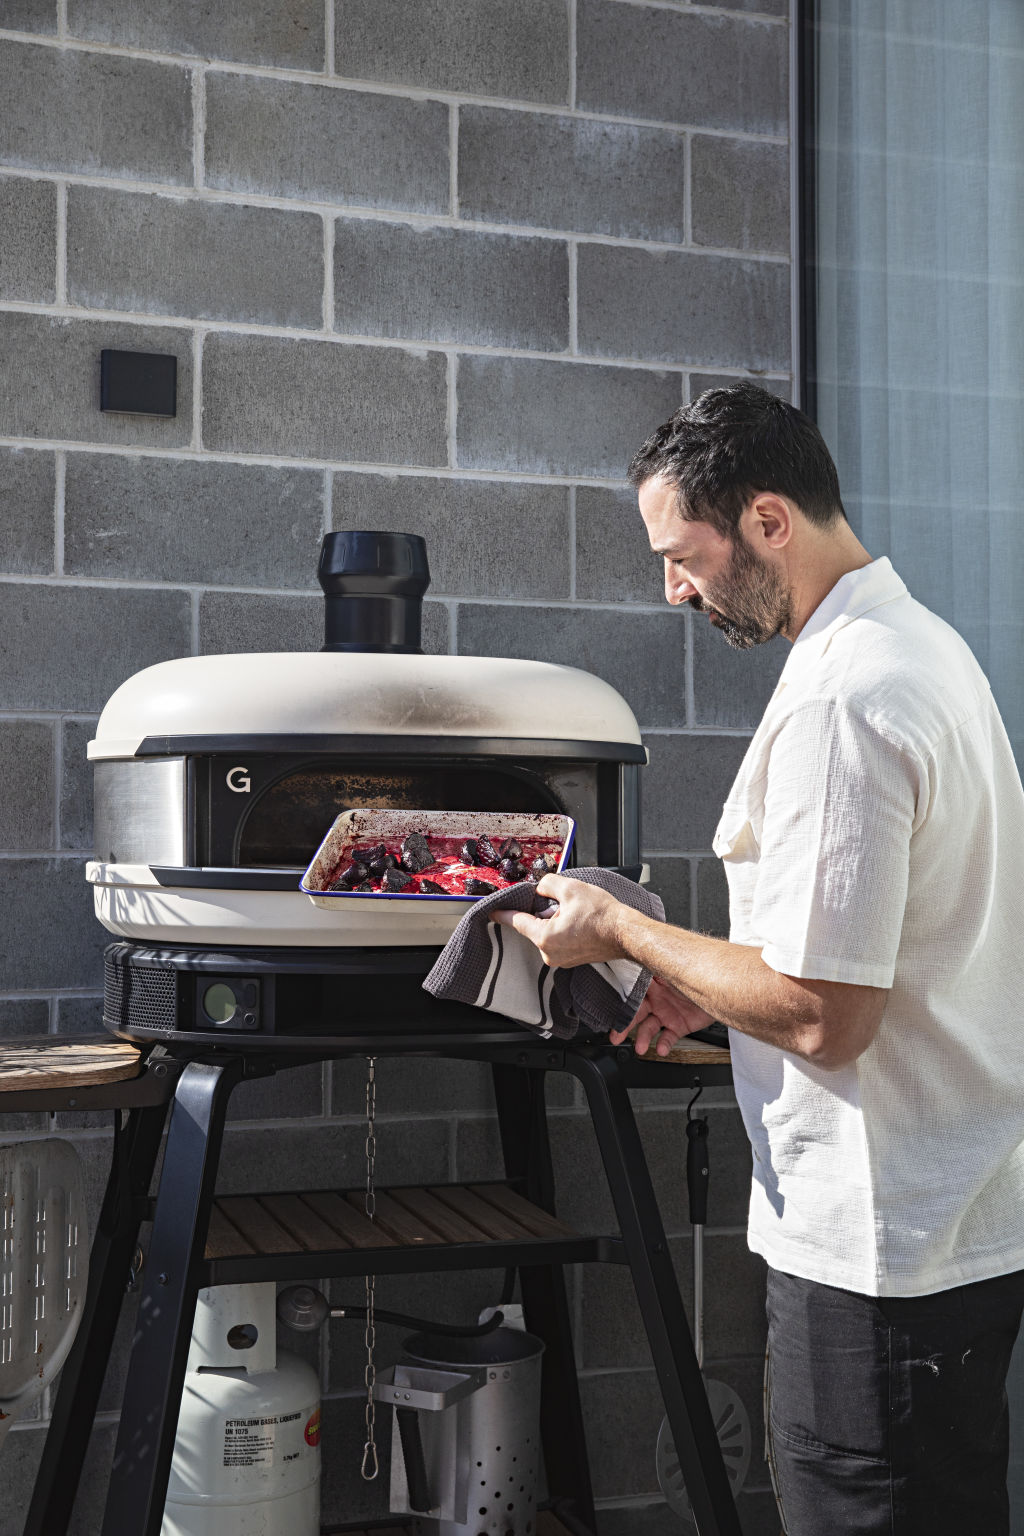 'I know it looks small, but I cook in this thing all the time,' Allen says of the pizza oven, used to whip up midweek meals. Photo: Natalie Jeffcott